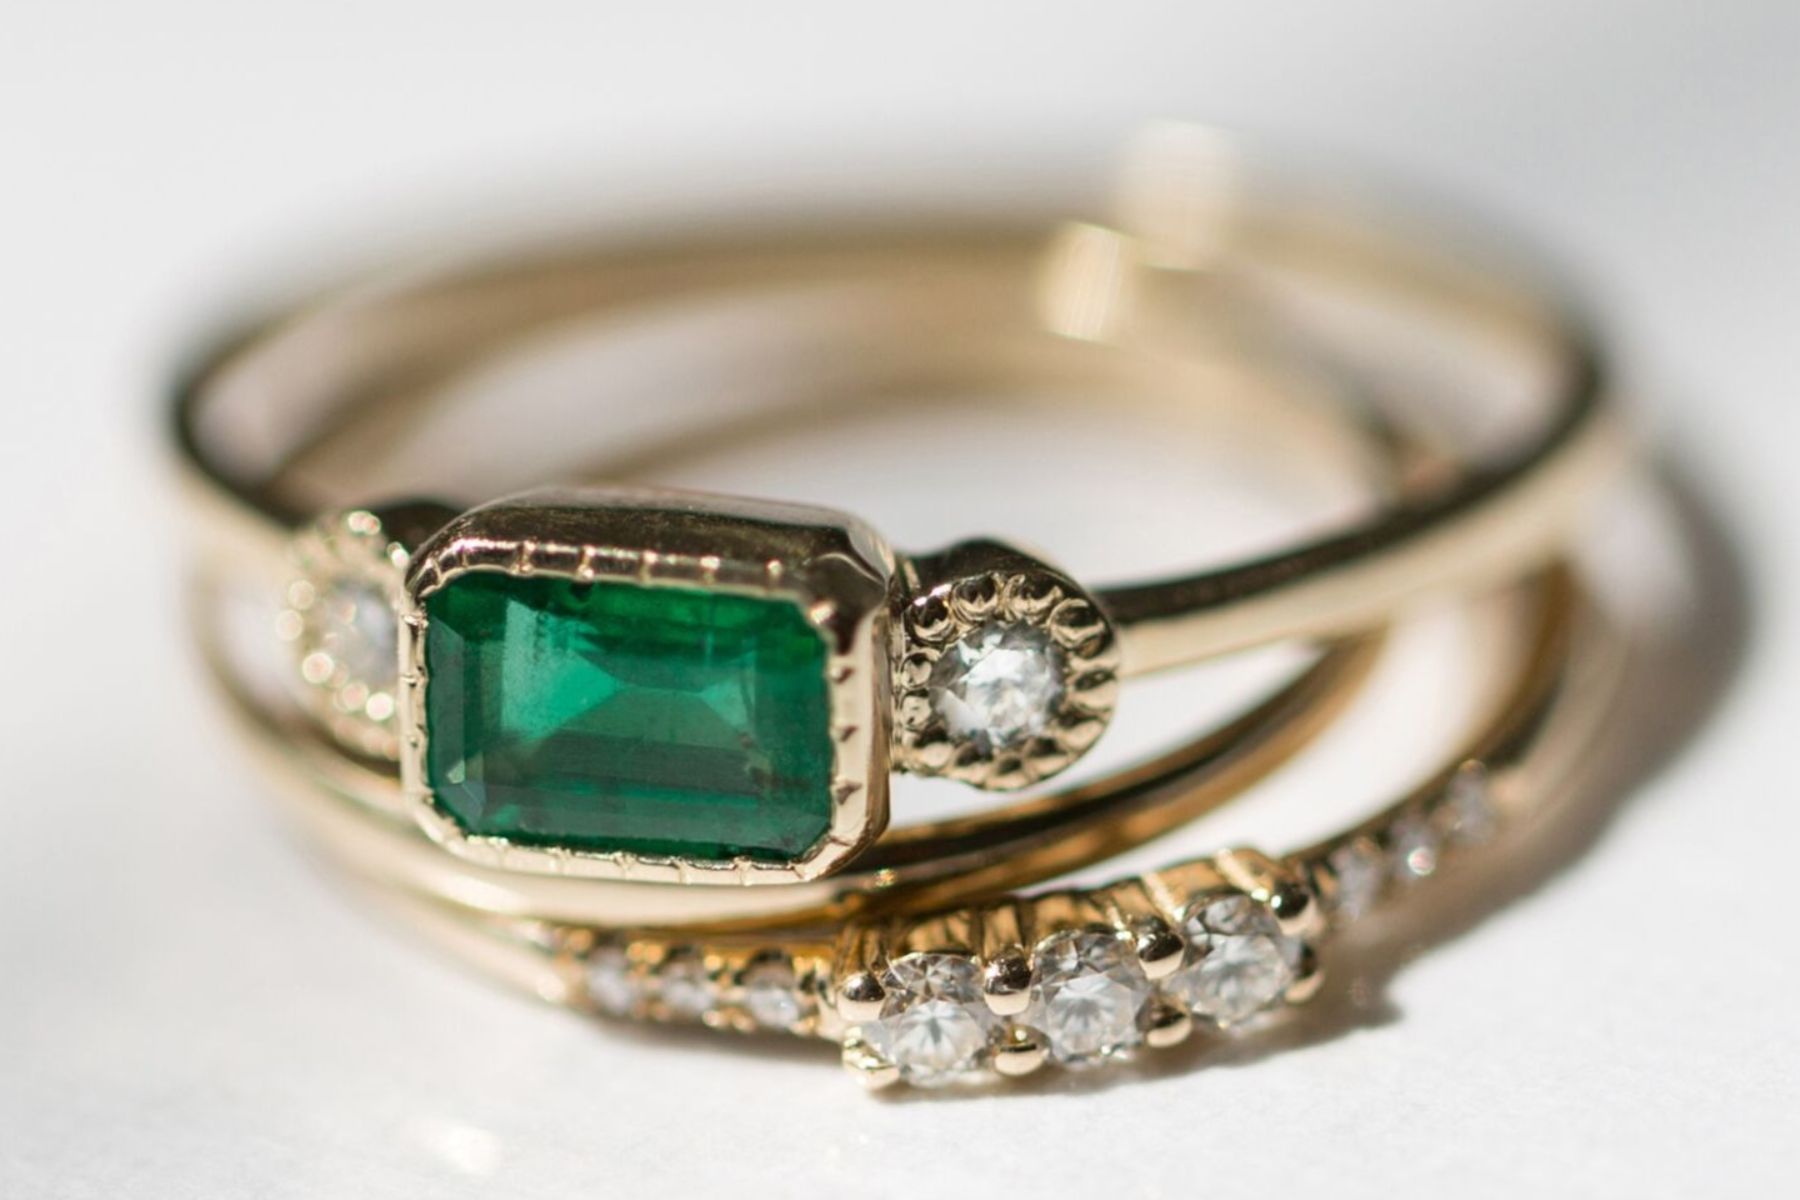 Rings with an emerald and diamonds